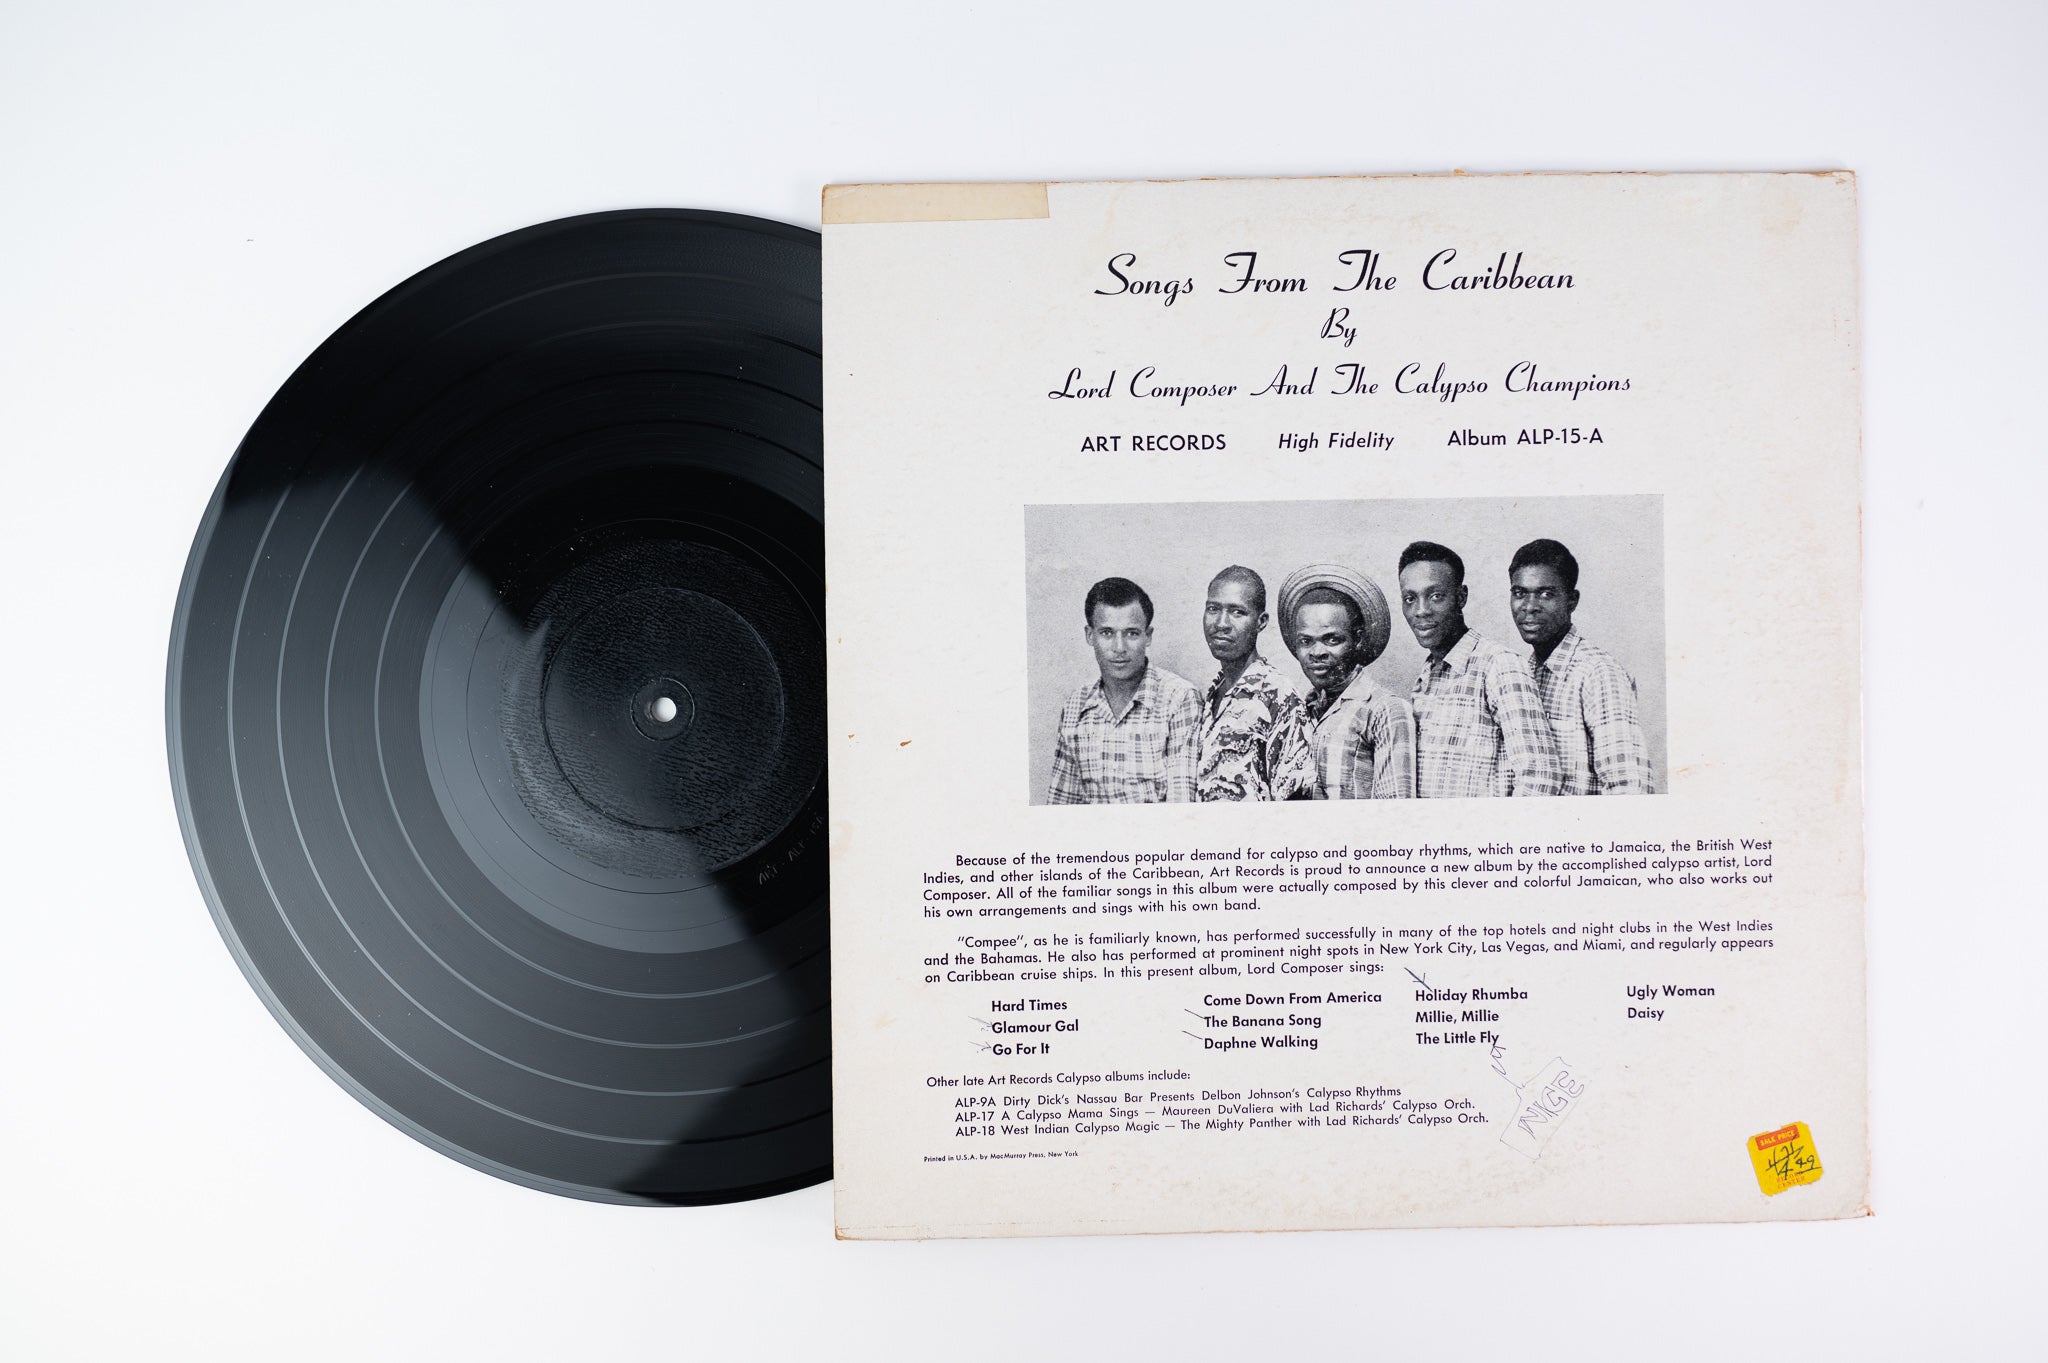 Lord Composer With The Calypso Champions - Songs From The Caribbean on Art Records